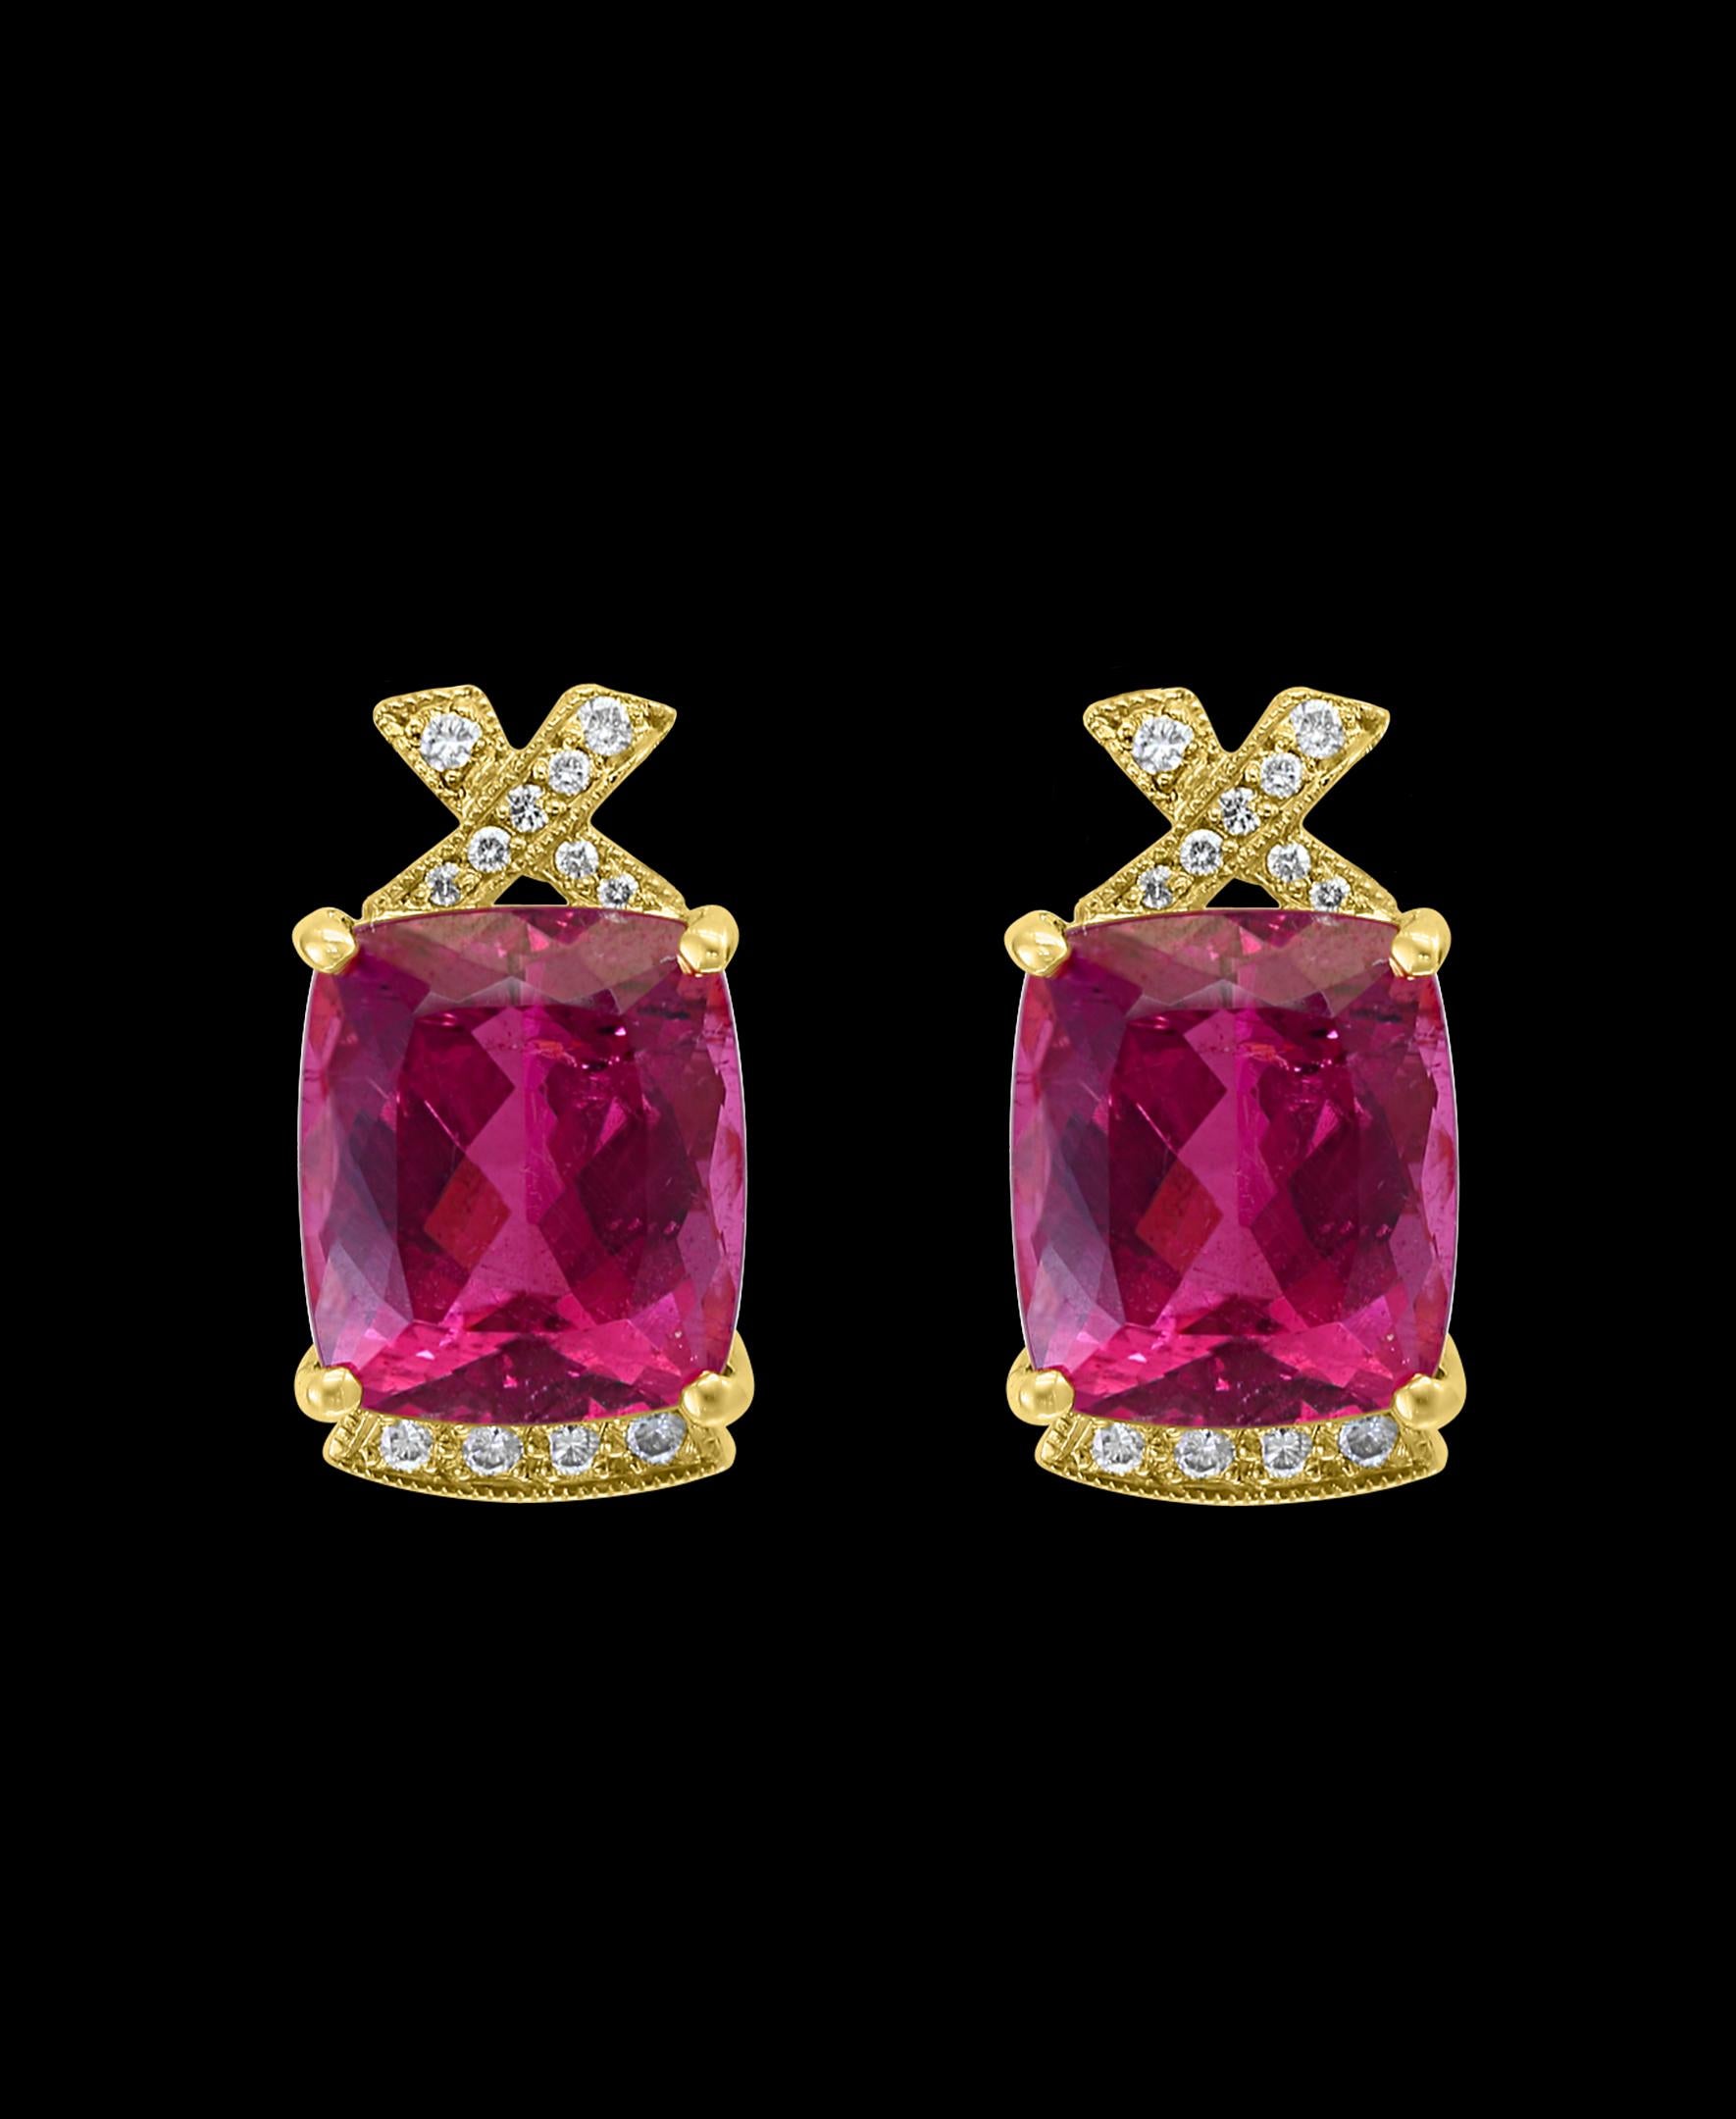 19 Carat  Natural Pink Tourmaline  & Diamond Cocktail  Earring , 14K Yellow Gold , Very desirable color and quality.
perfect pair made in 14 Karat Yellow gold
Gold 17 Grams
 Diamonds: approximate .40 ct 
Earring  can be worn as Clip earrings as  we